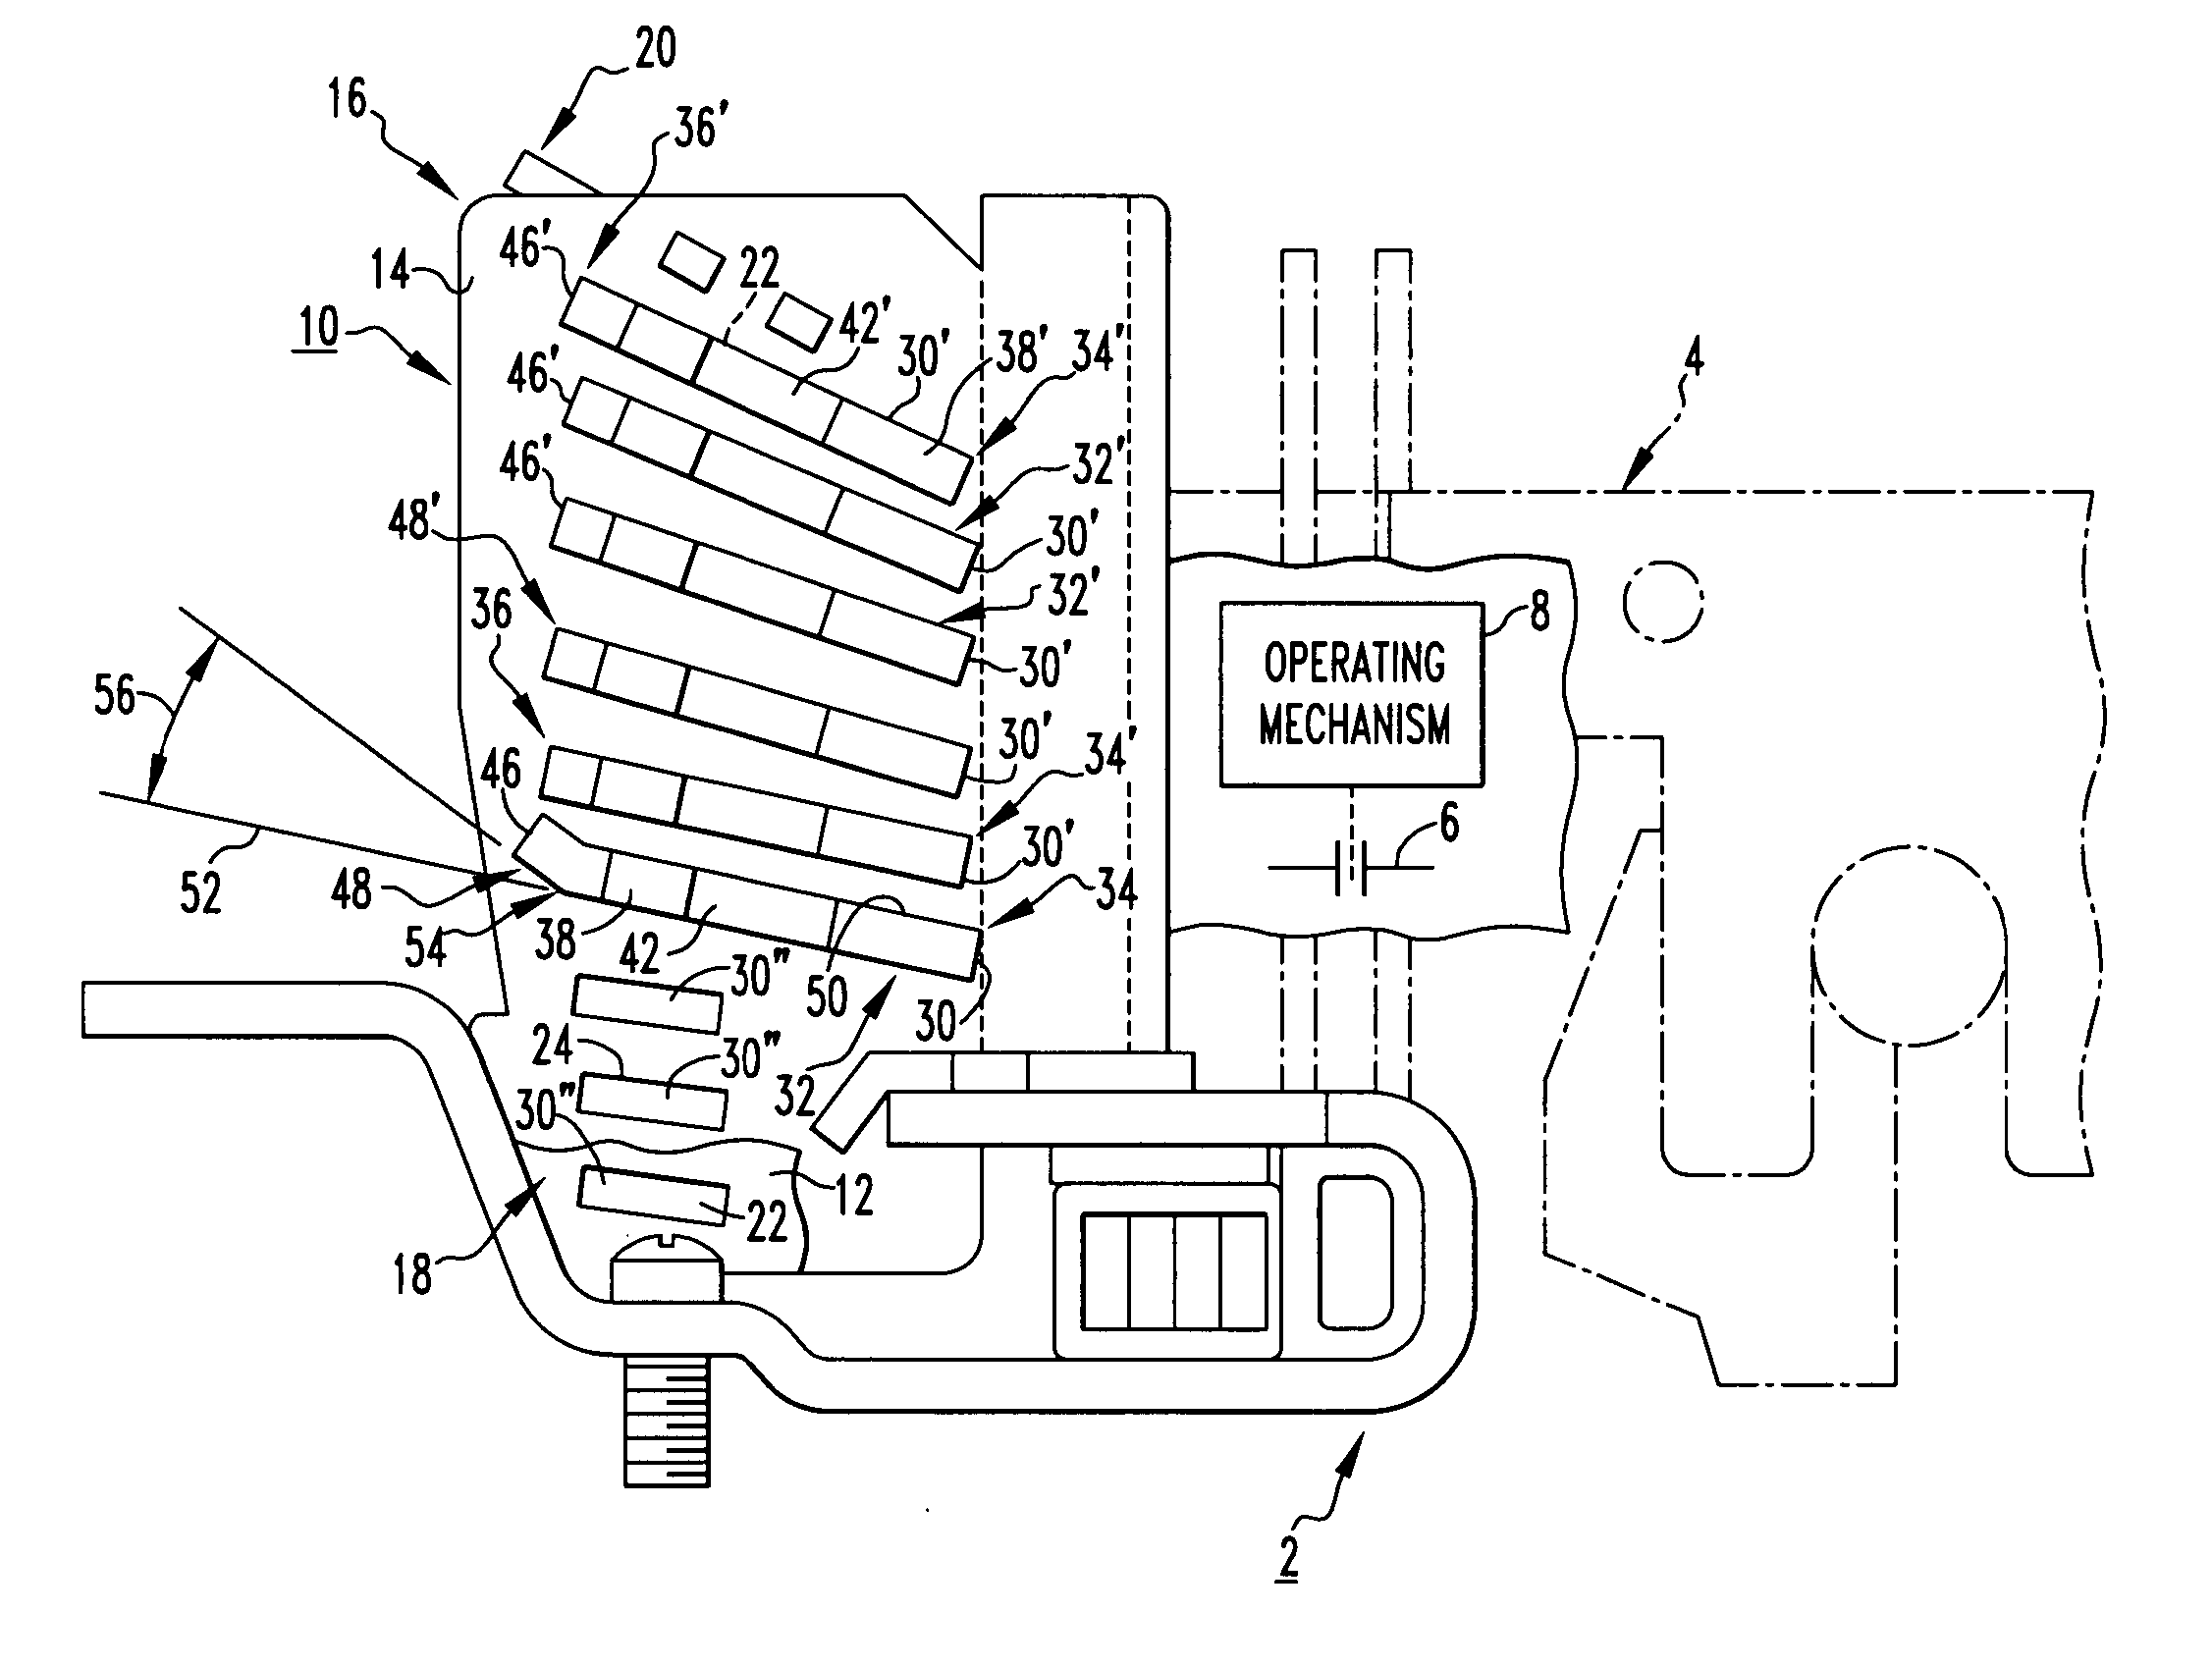 Secondary arc chute and electrical switching apparatus incorporating same